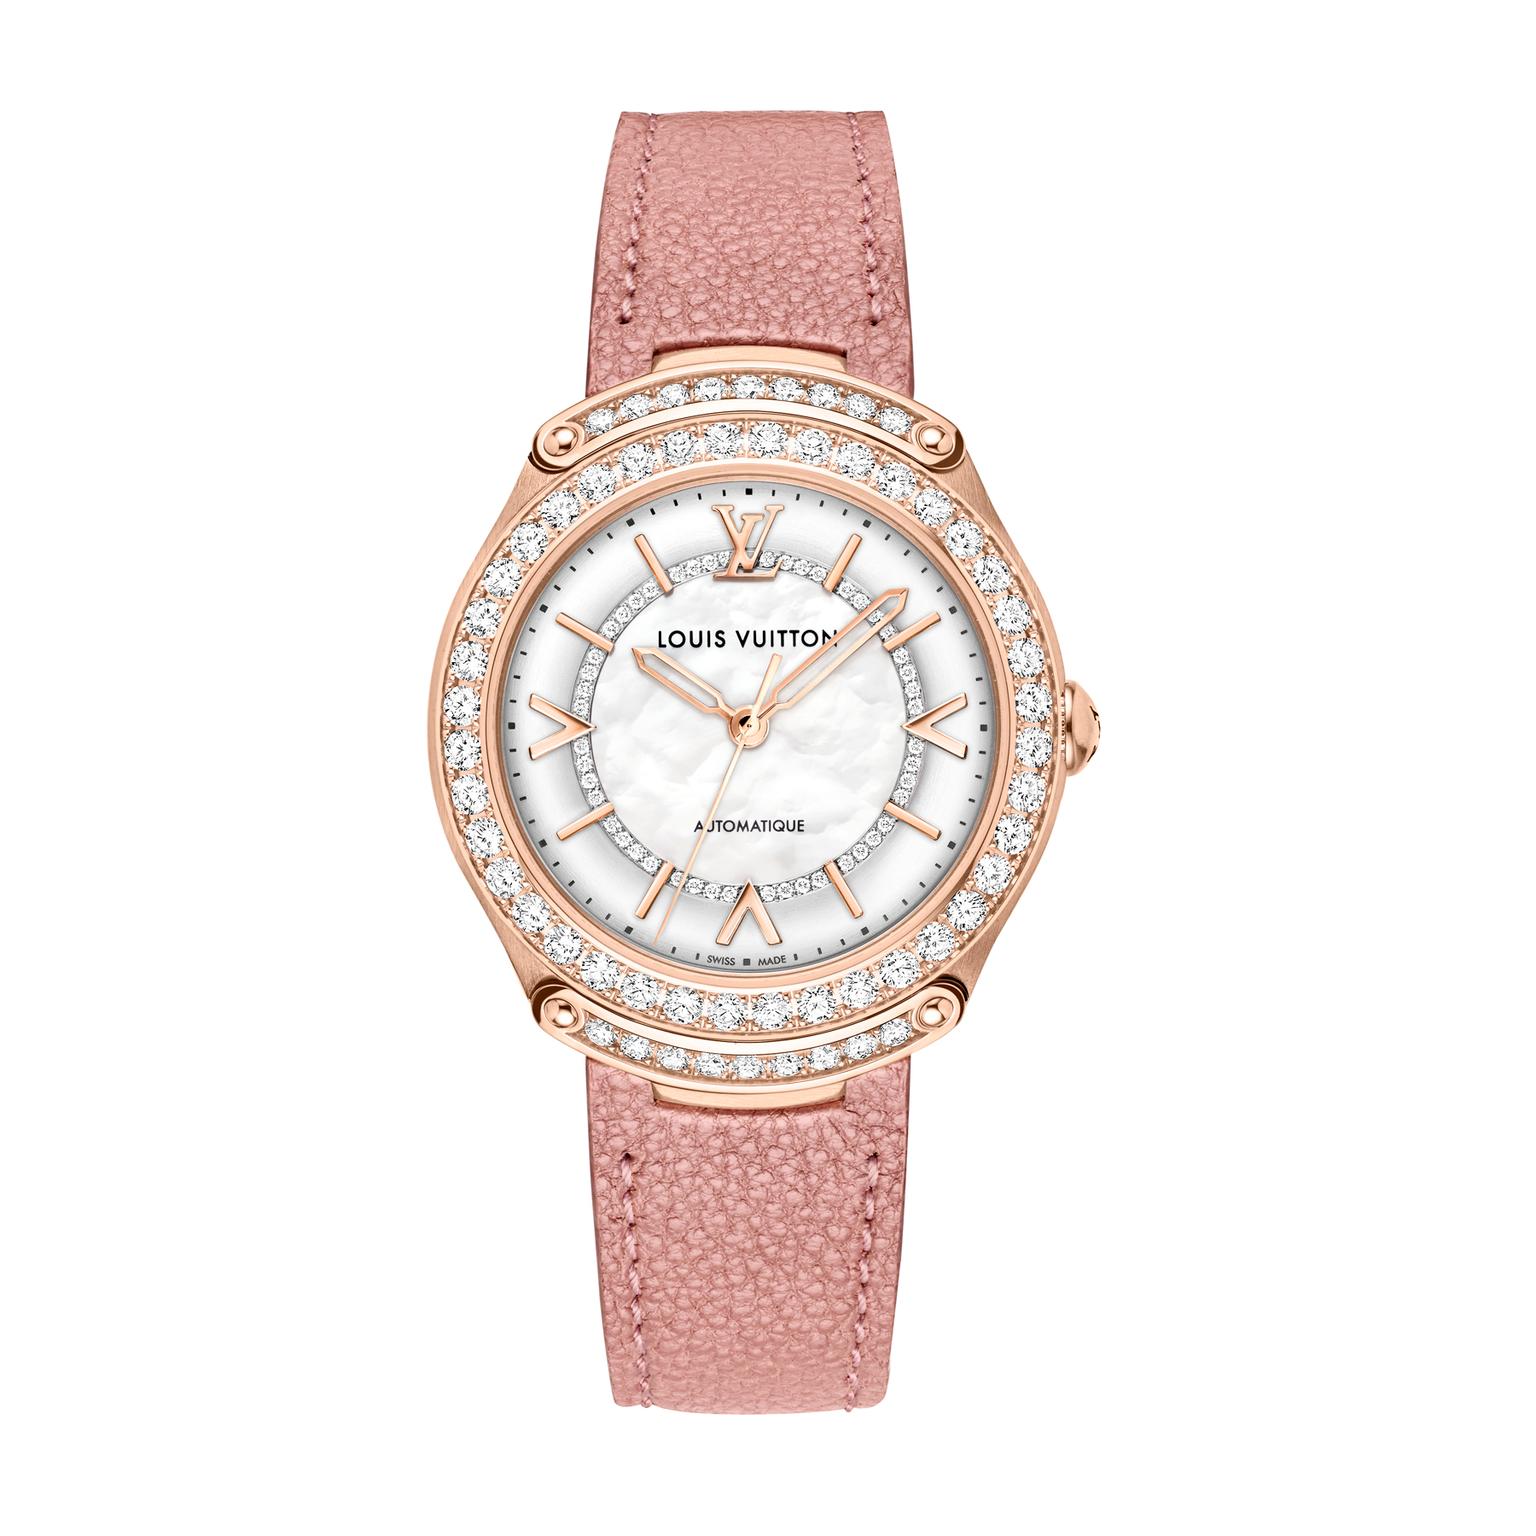 LV Fifty Five watch in pink gold and diamonds 